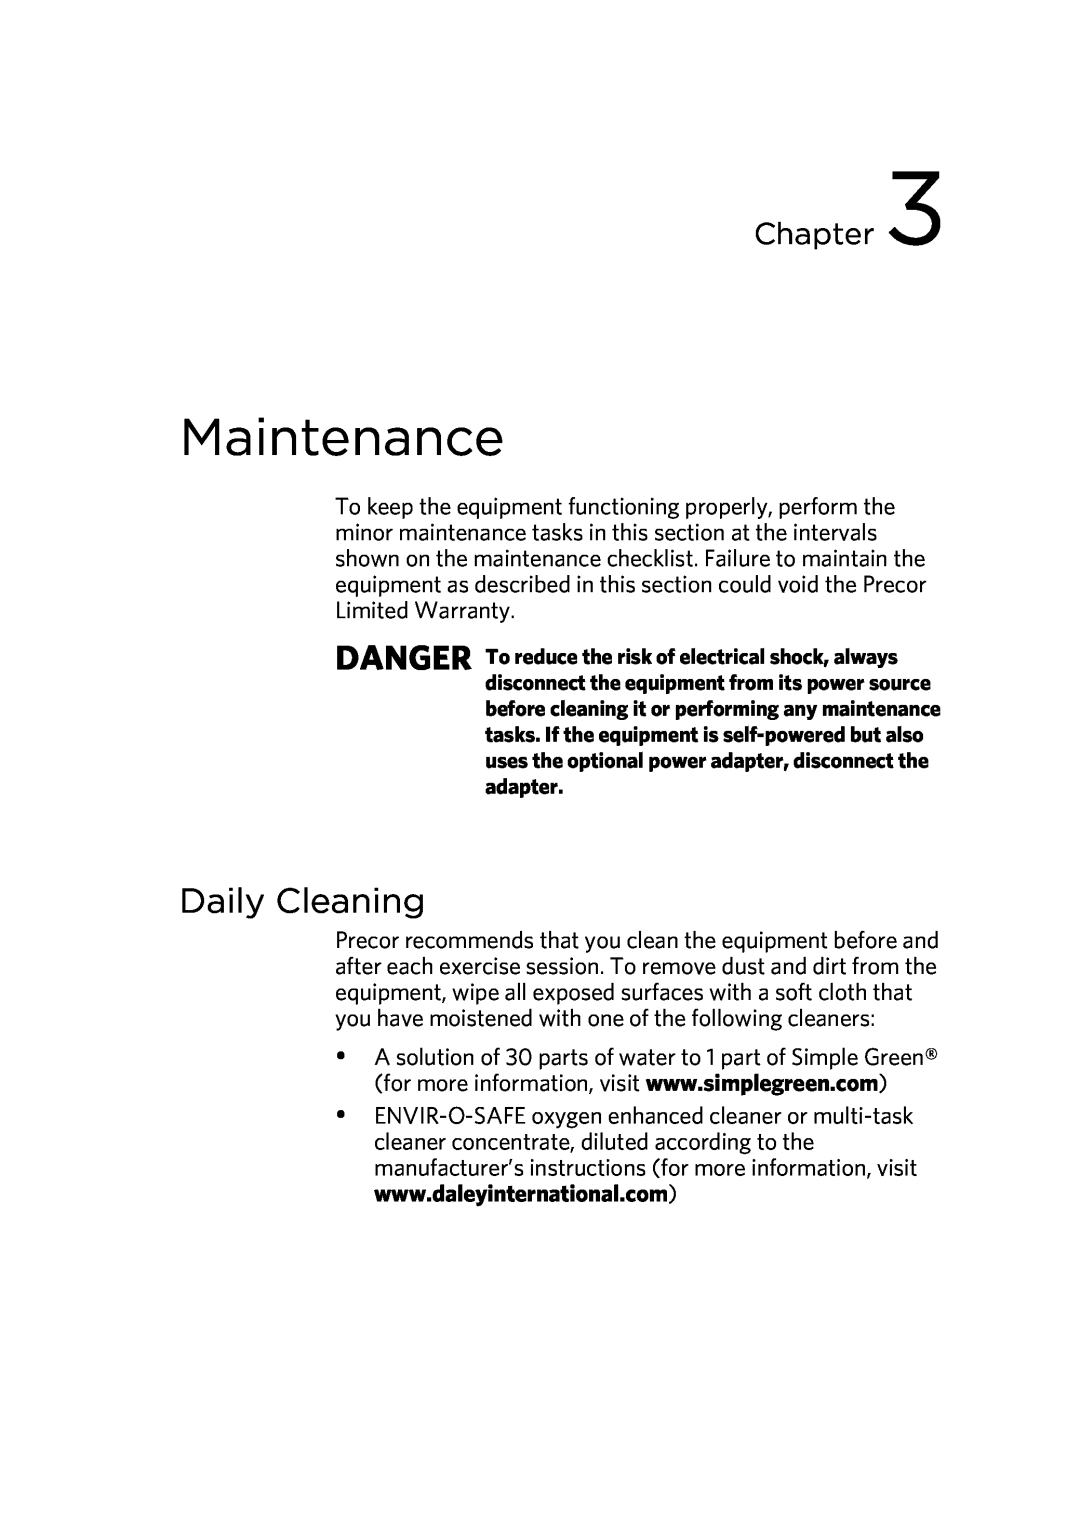 Precor P30 manual Daily Cleaning, Maintenance, Chapter 